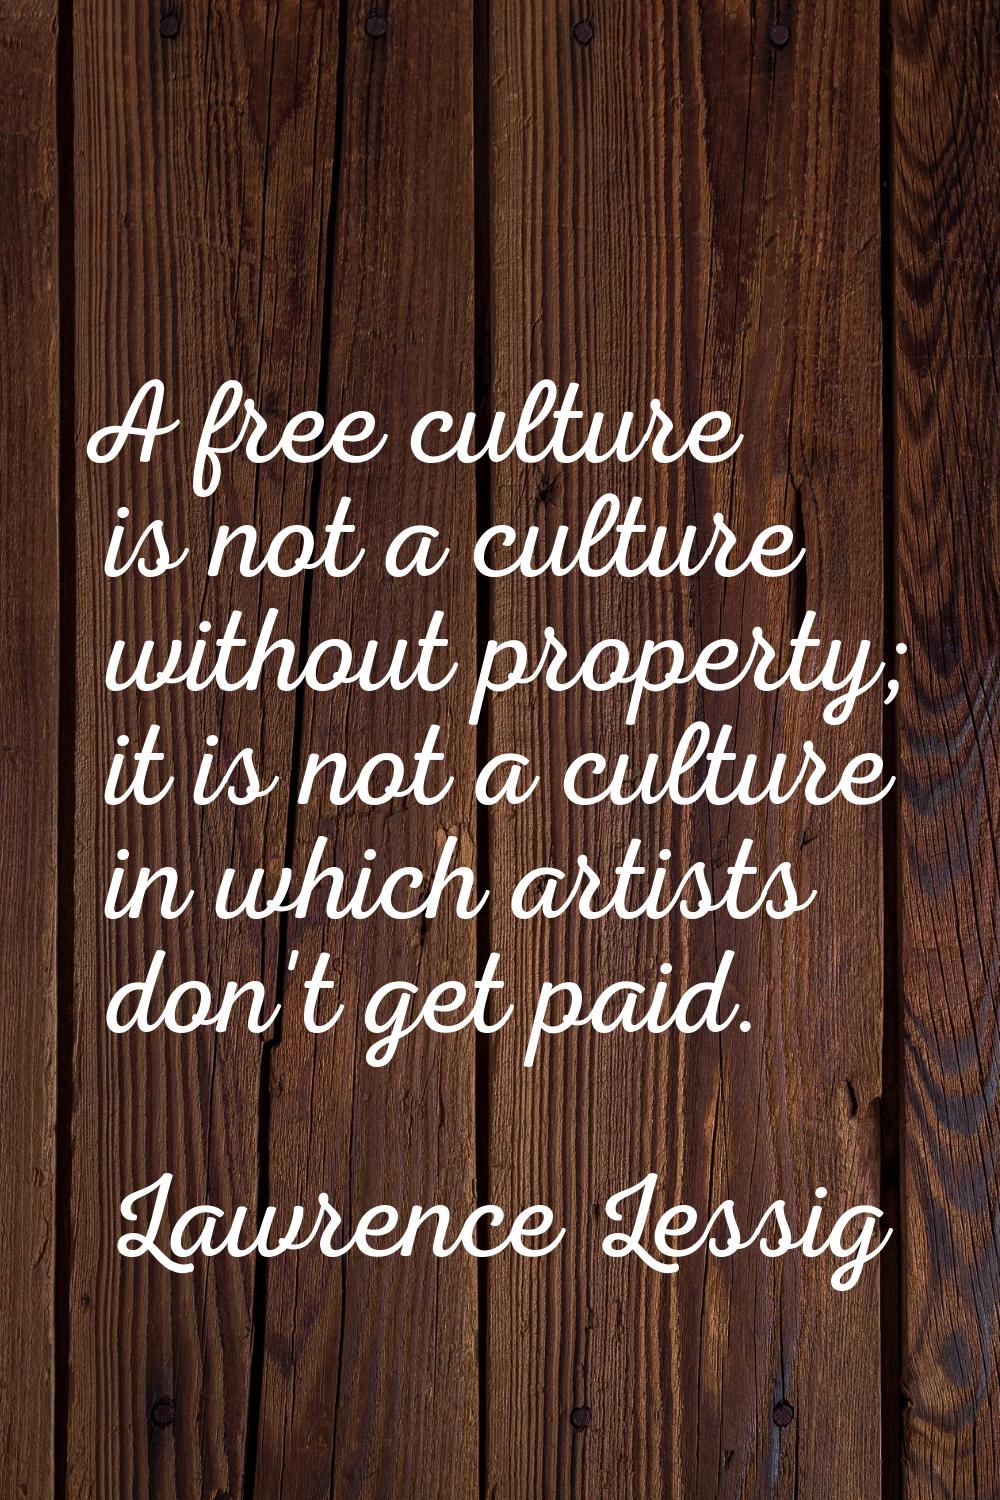 A free culture is not a culture without property; it is not a culture in which artists don't get pa